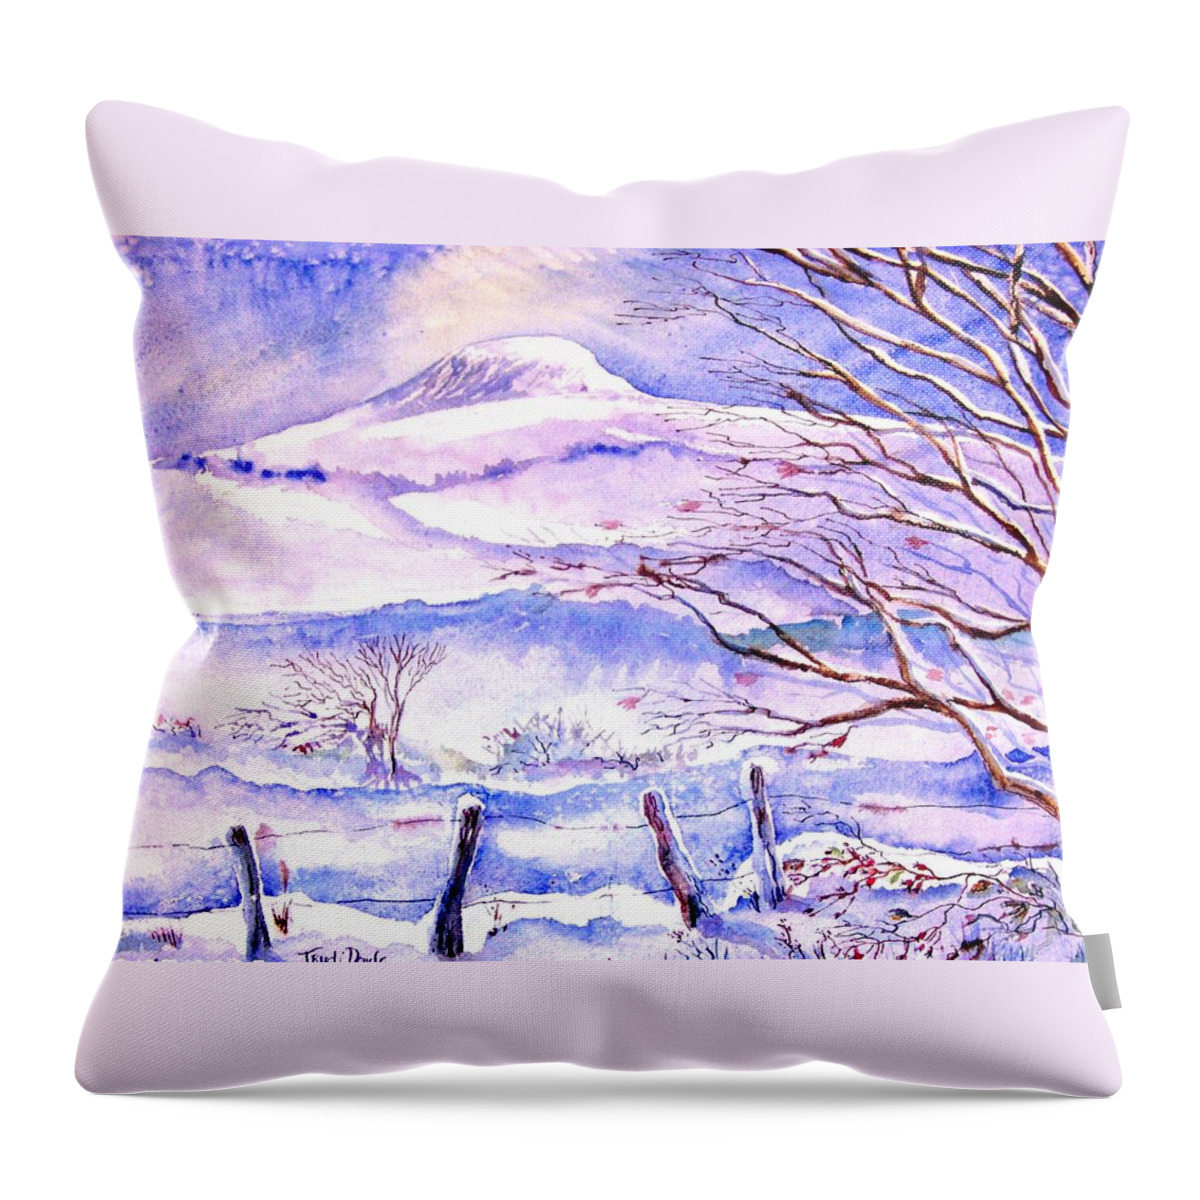  Snowfall Throw Pillow featuring the painting Snowfall on Eagle Hill Hacketstown Ireland by Trudi Doyle